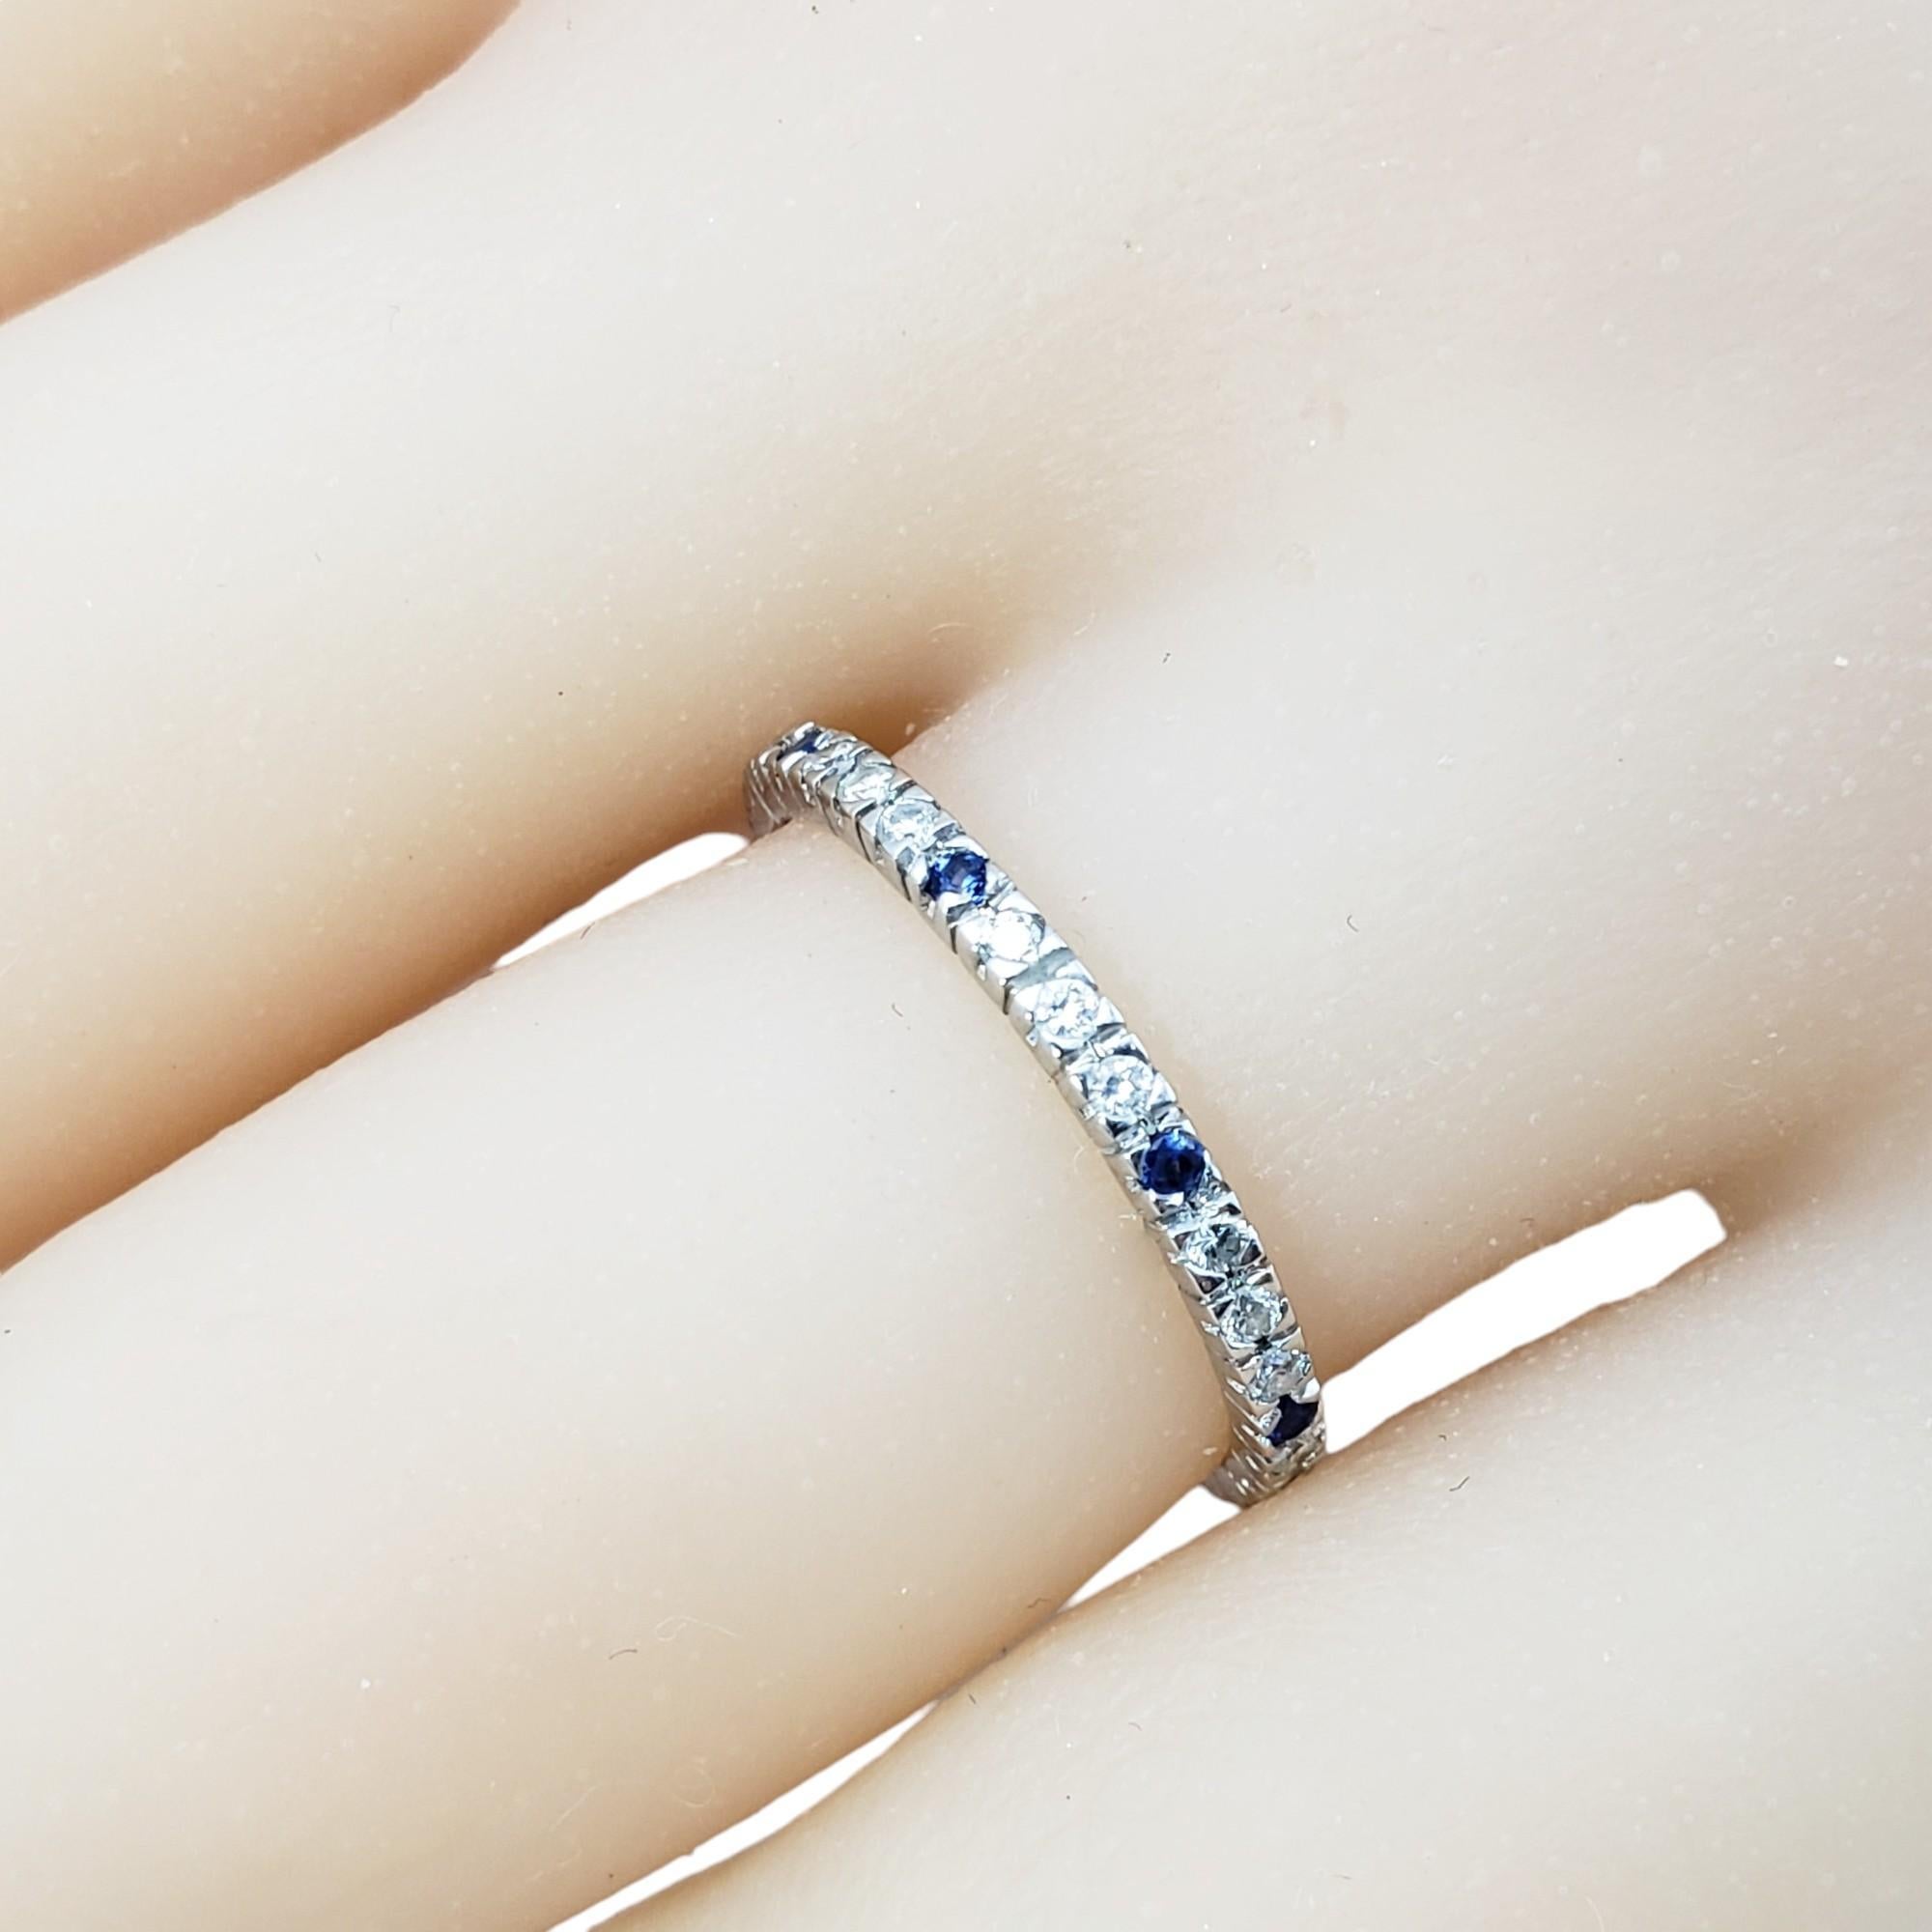 14 Karat White Gold Diamond and Blue Faceted Stone Band 5.25-5.5 #17273 For Sale 3